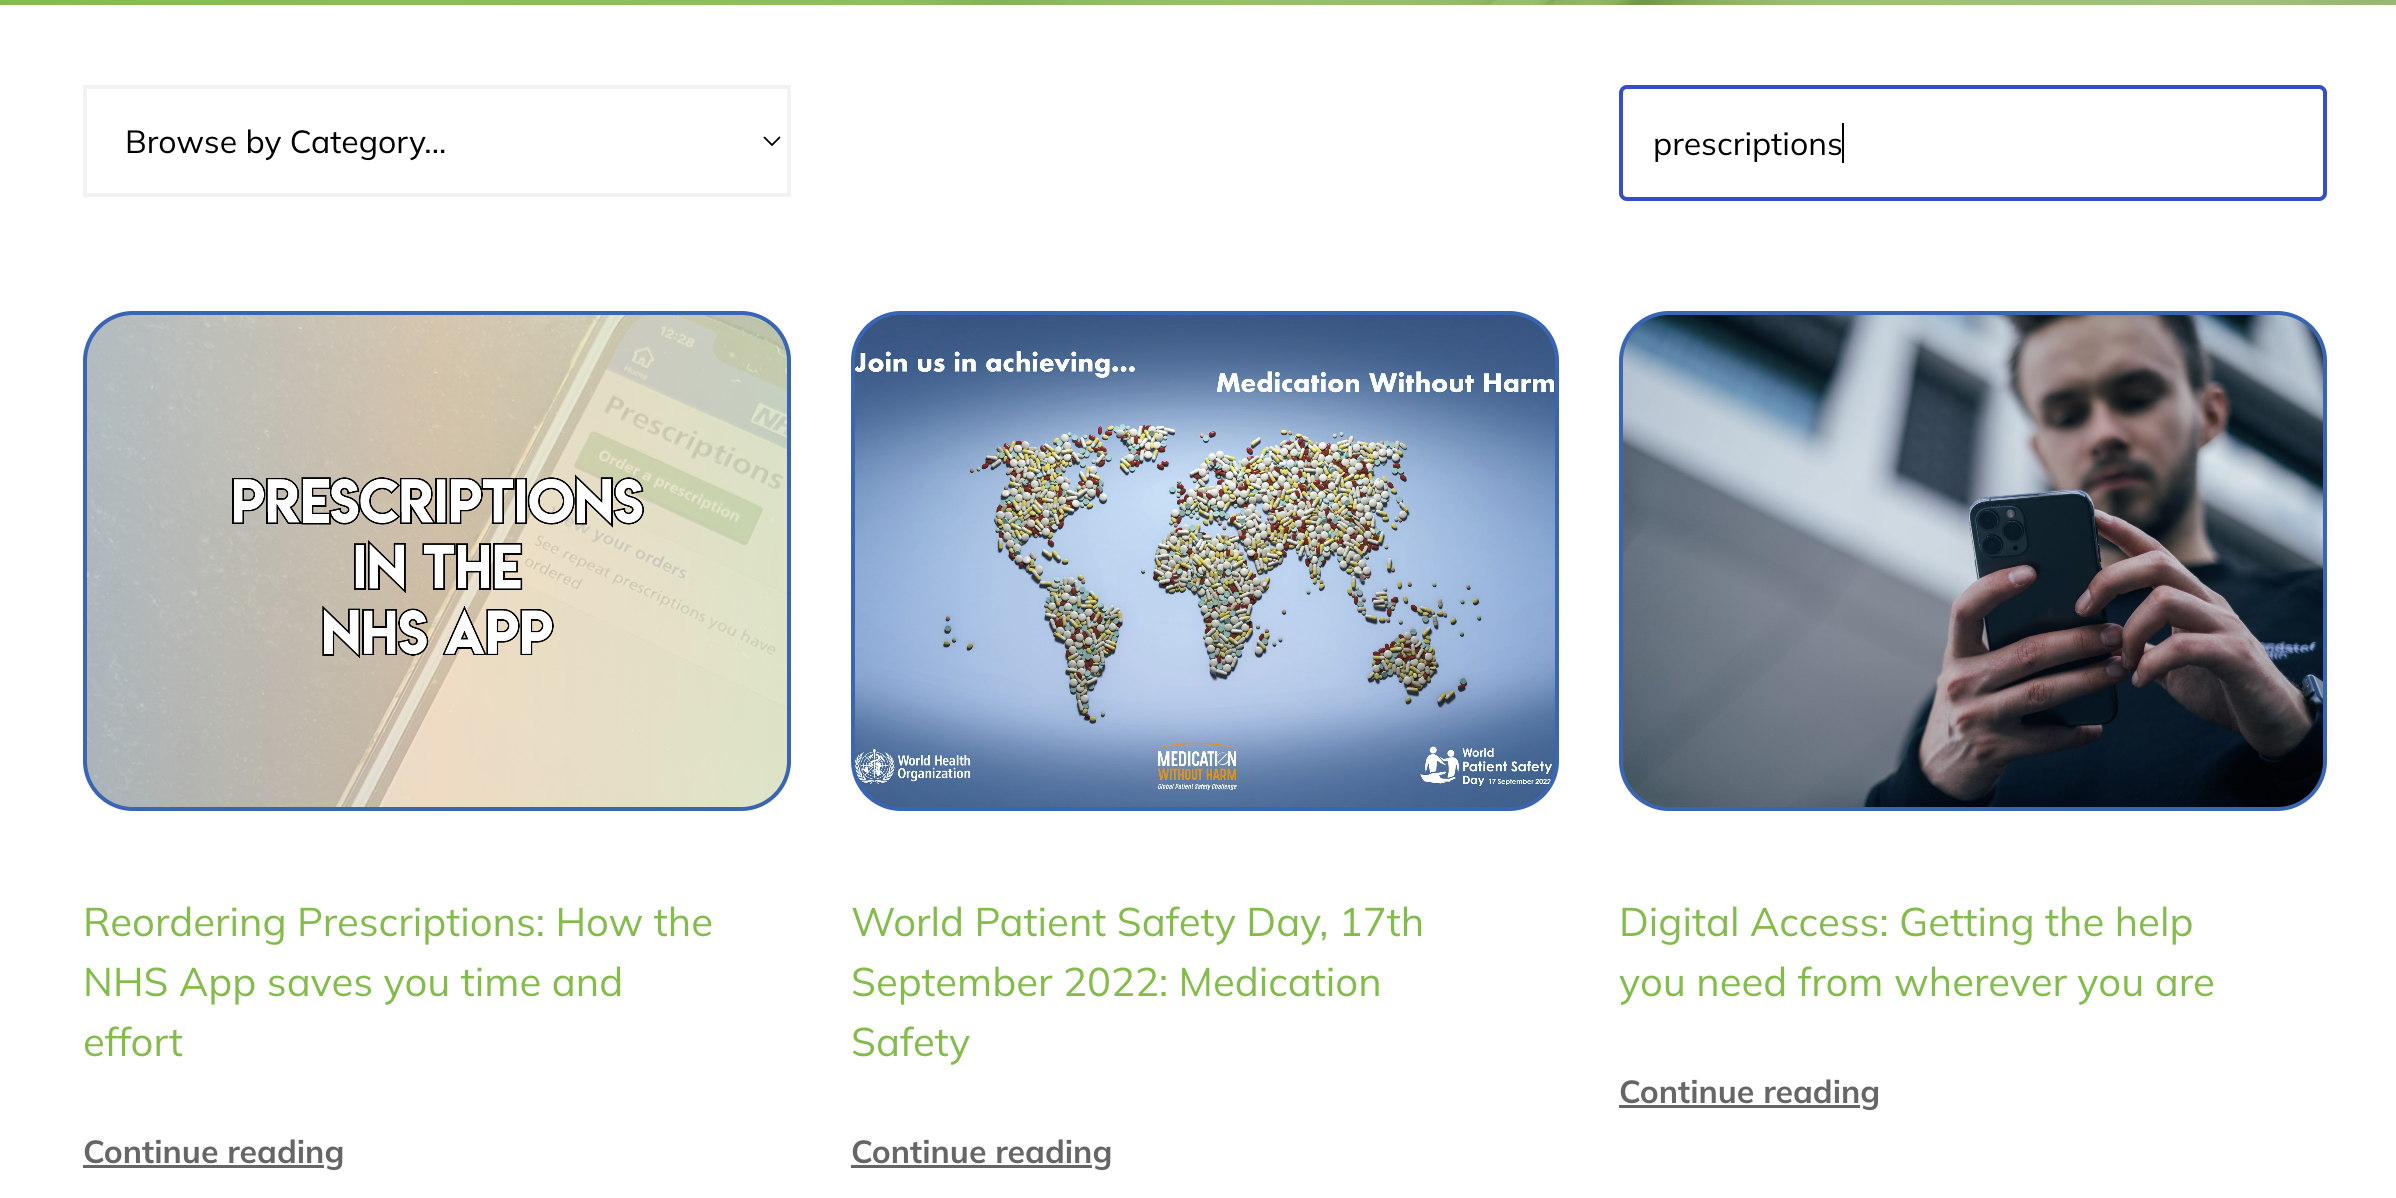 a screenshot of our website news page, the key workd prescriptions has been entered in the search box